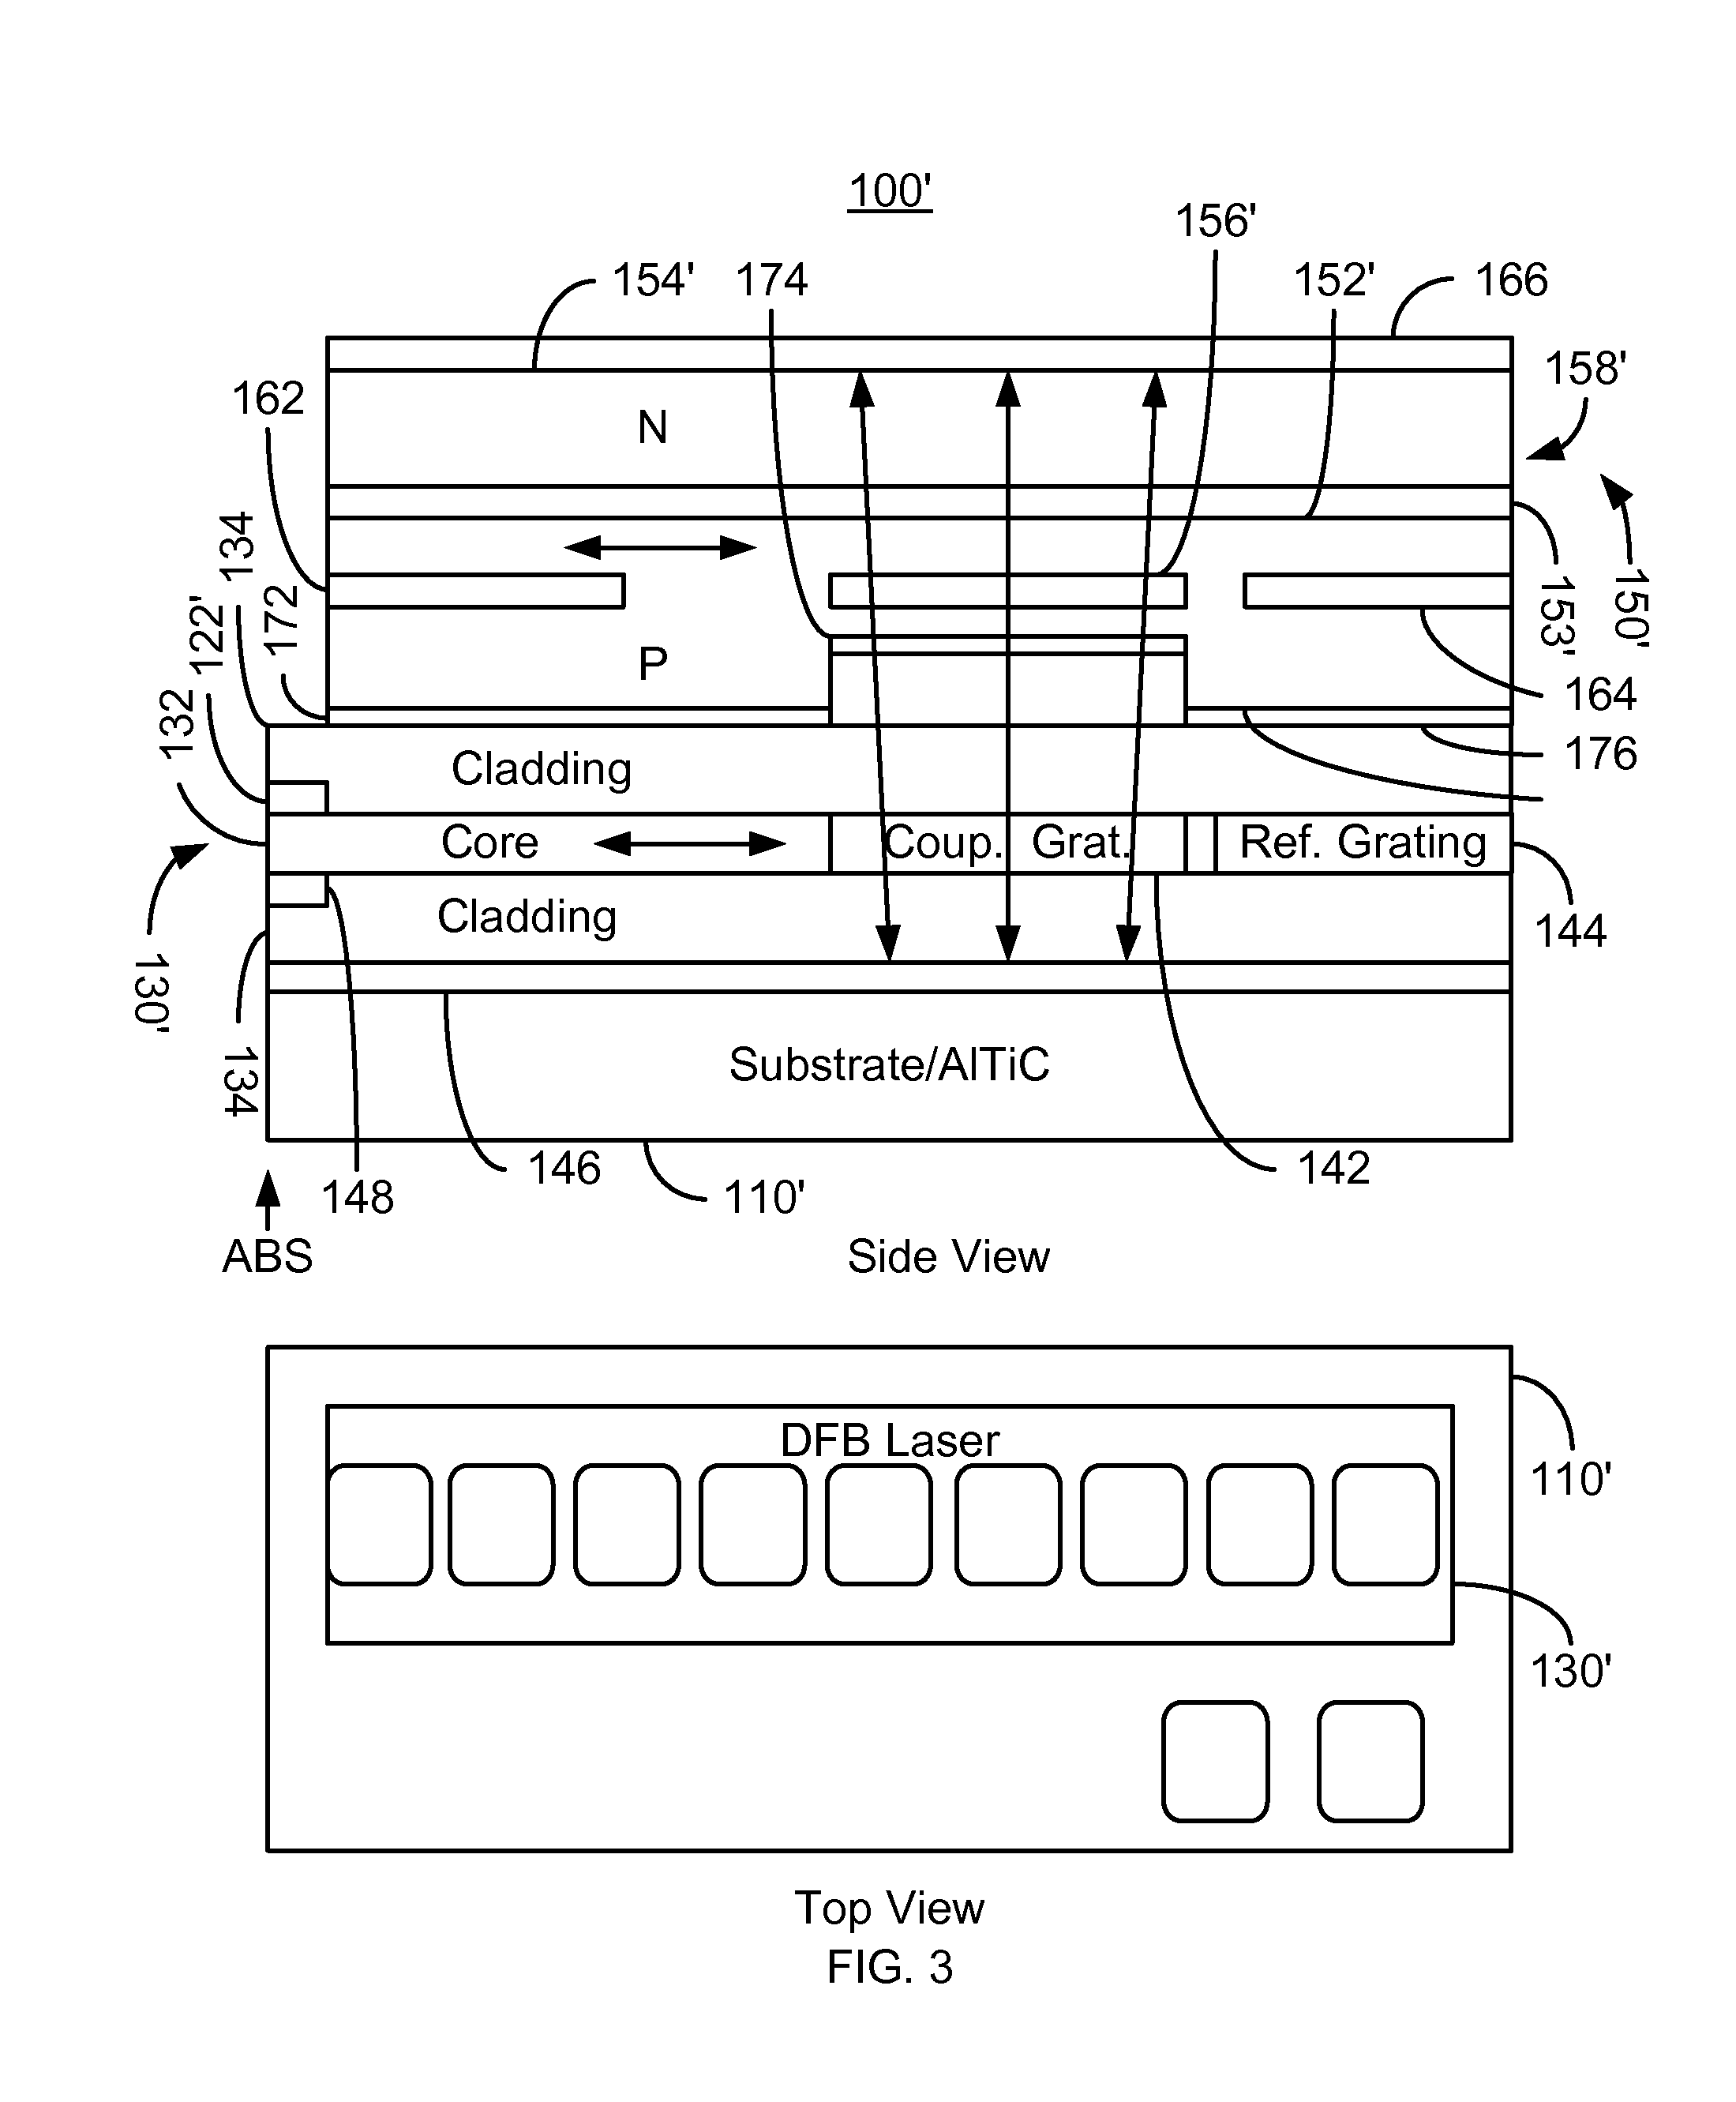 Energy assisted magnetic recording disk drive using a distributed feedback laser